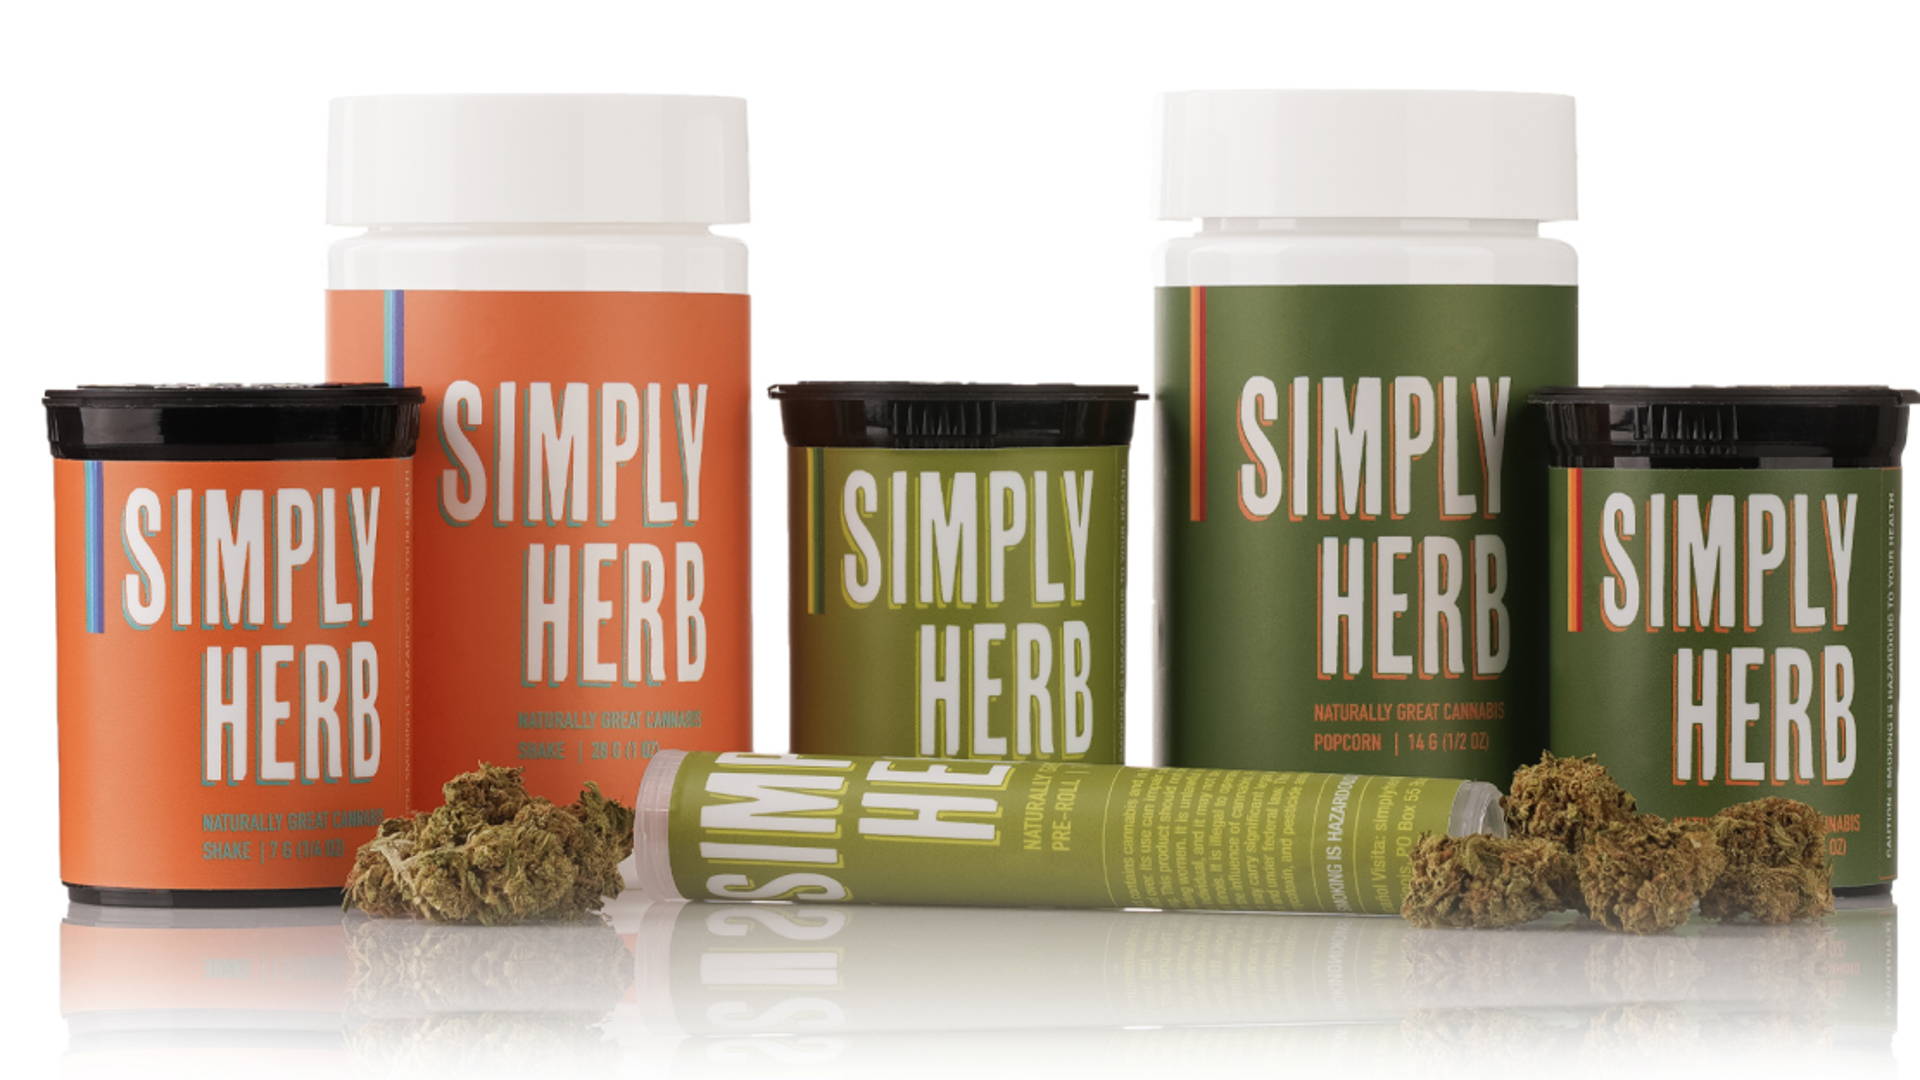 Featured image for Simply Herb Is A New, Value-Focused Cannabis Brand With Mission-Clear Packaging